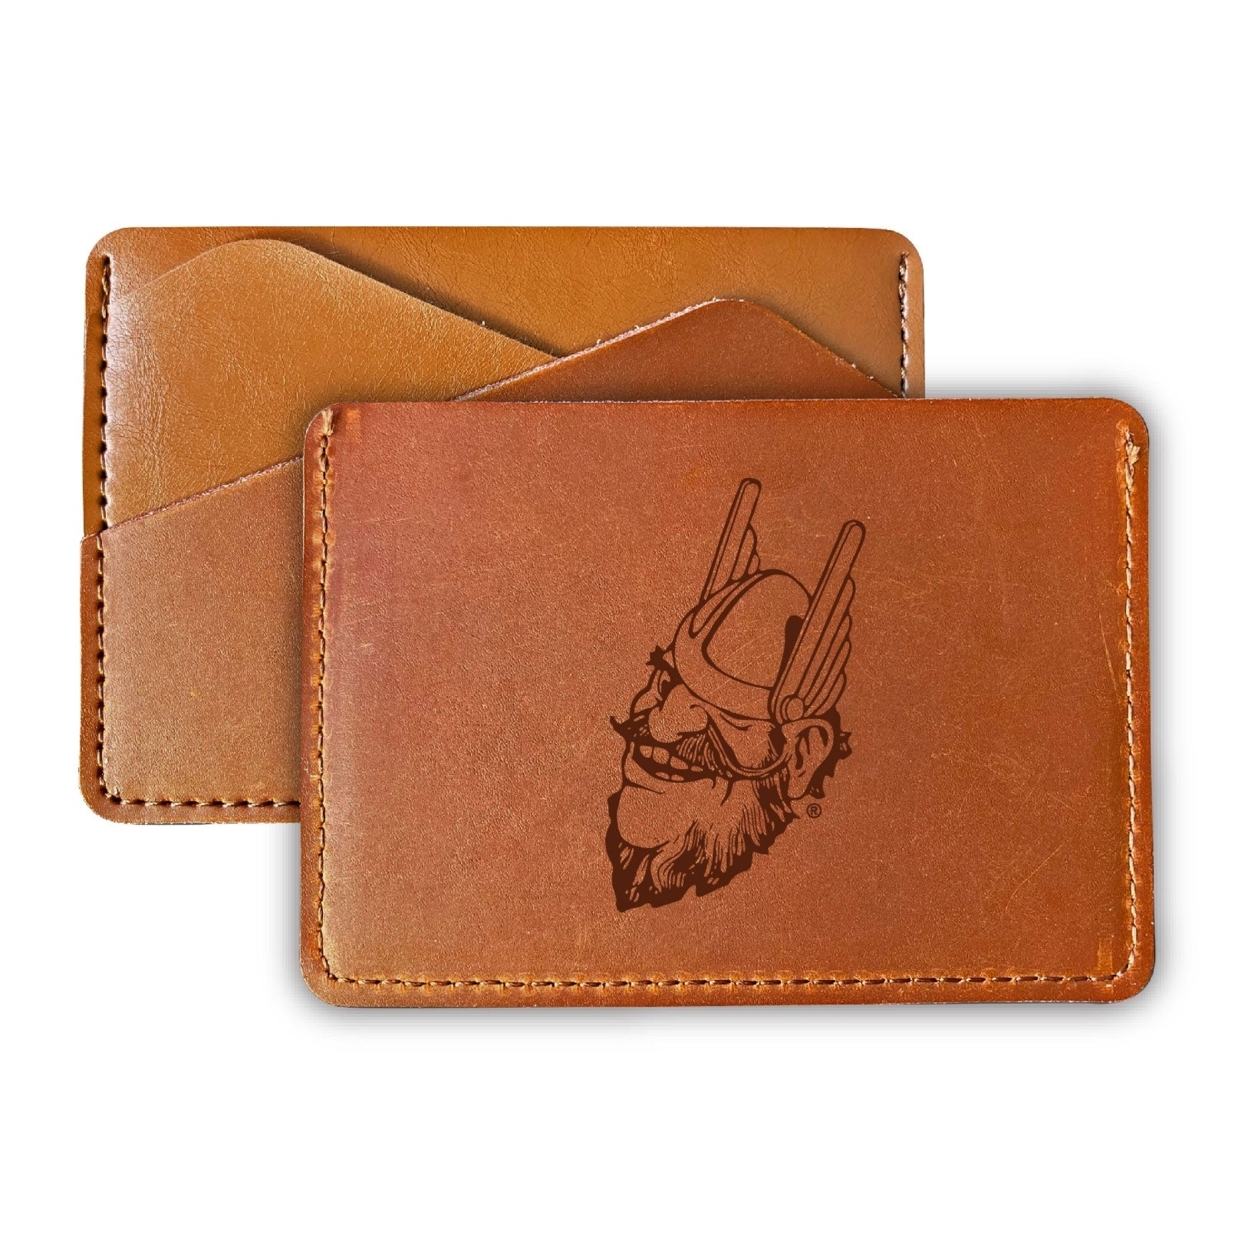 Idaho Vandals College Leather Card Holder Wallet